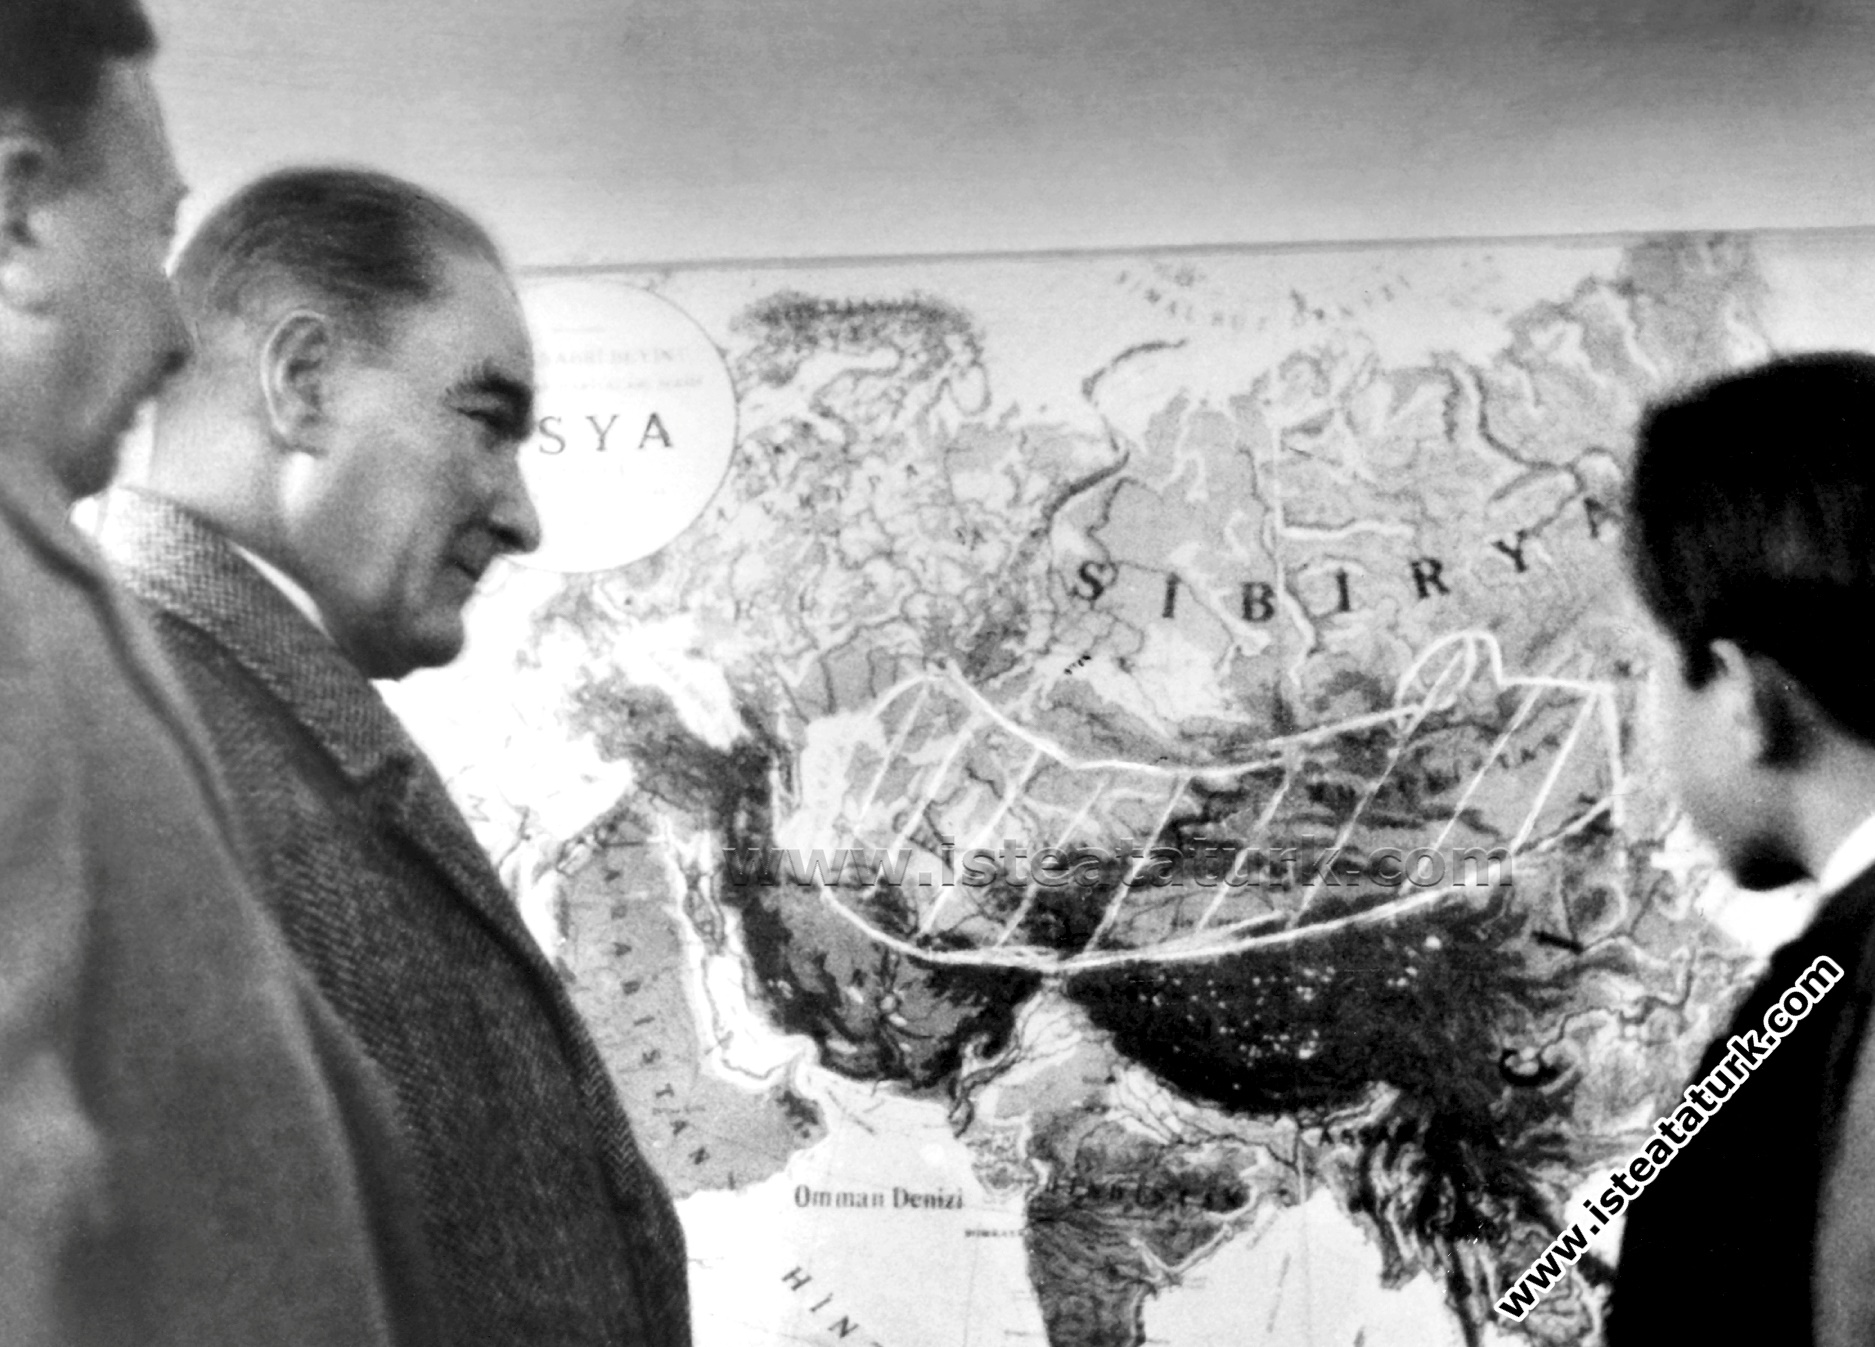 Atatürk's Thesis on History: Central Asia as a Cradle of Civilization